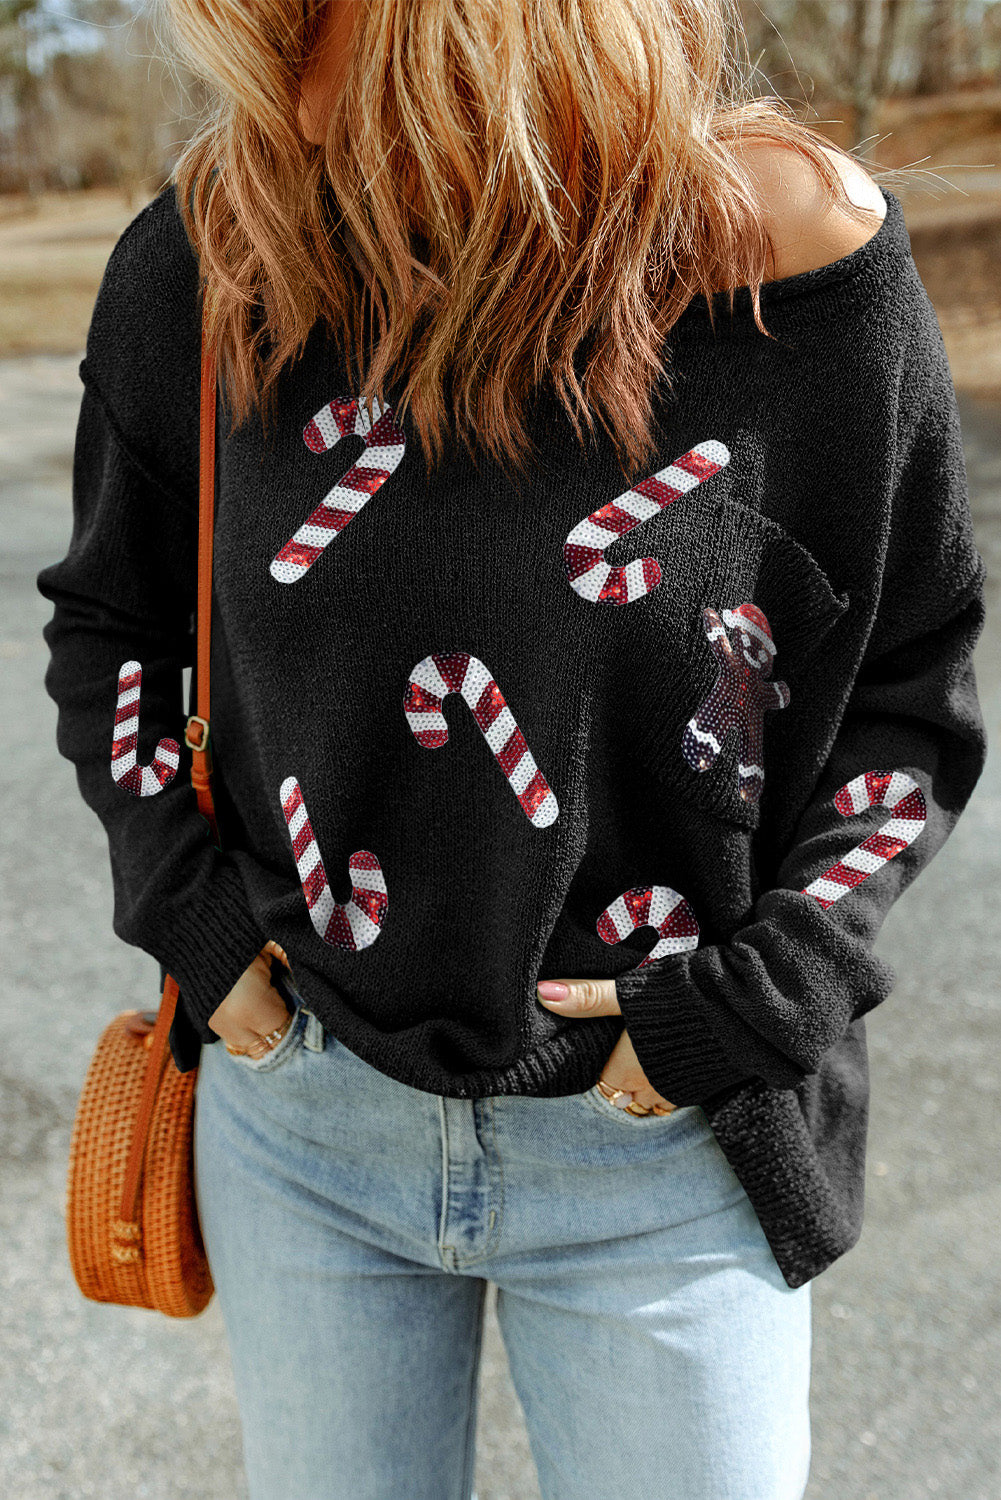 Black Sequined Candy Canes Gingerbread Man Sweater